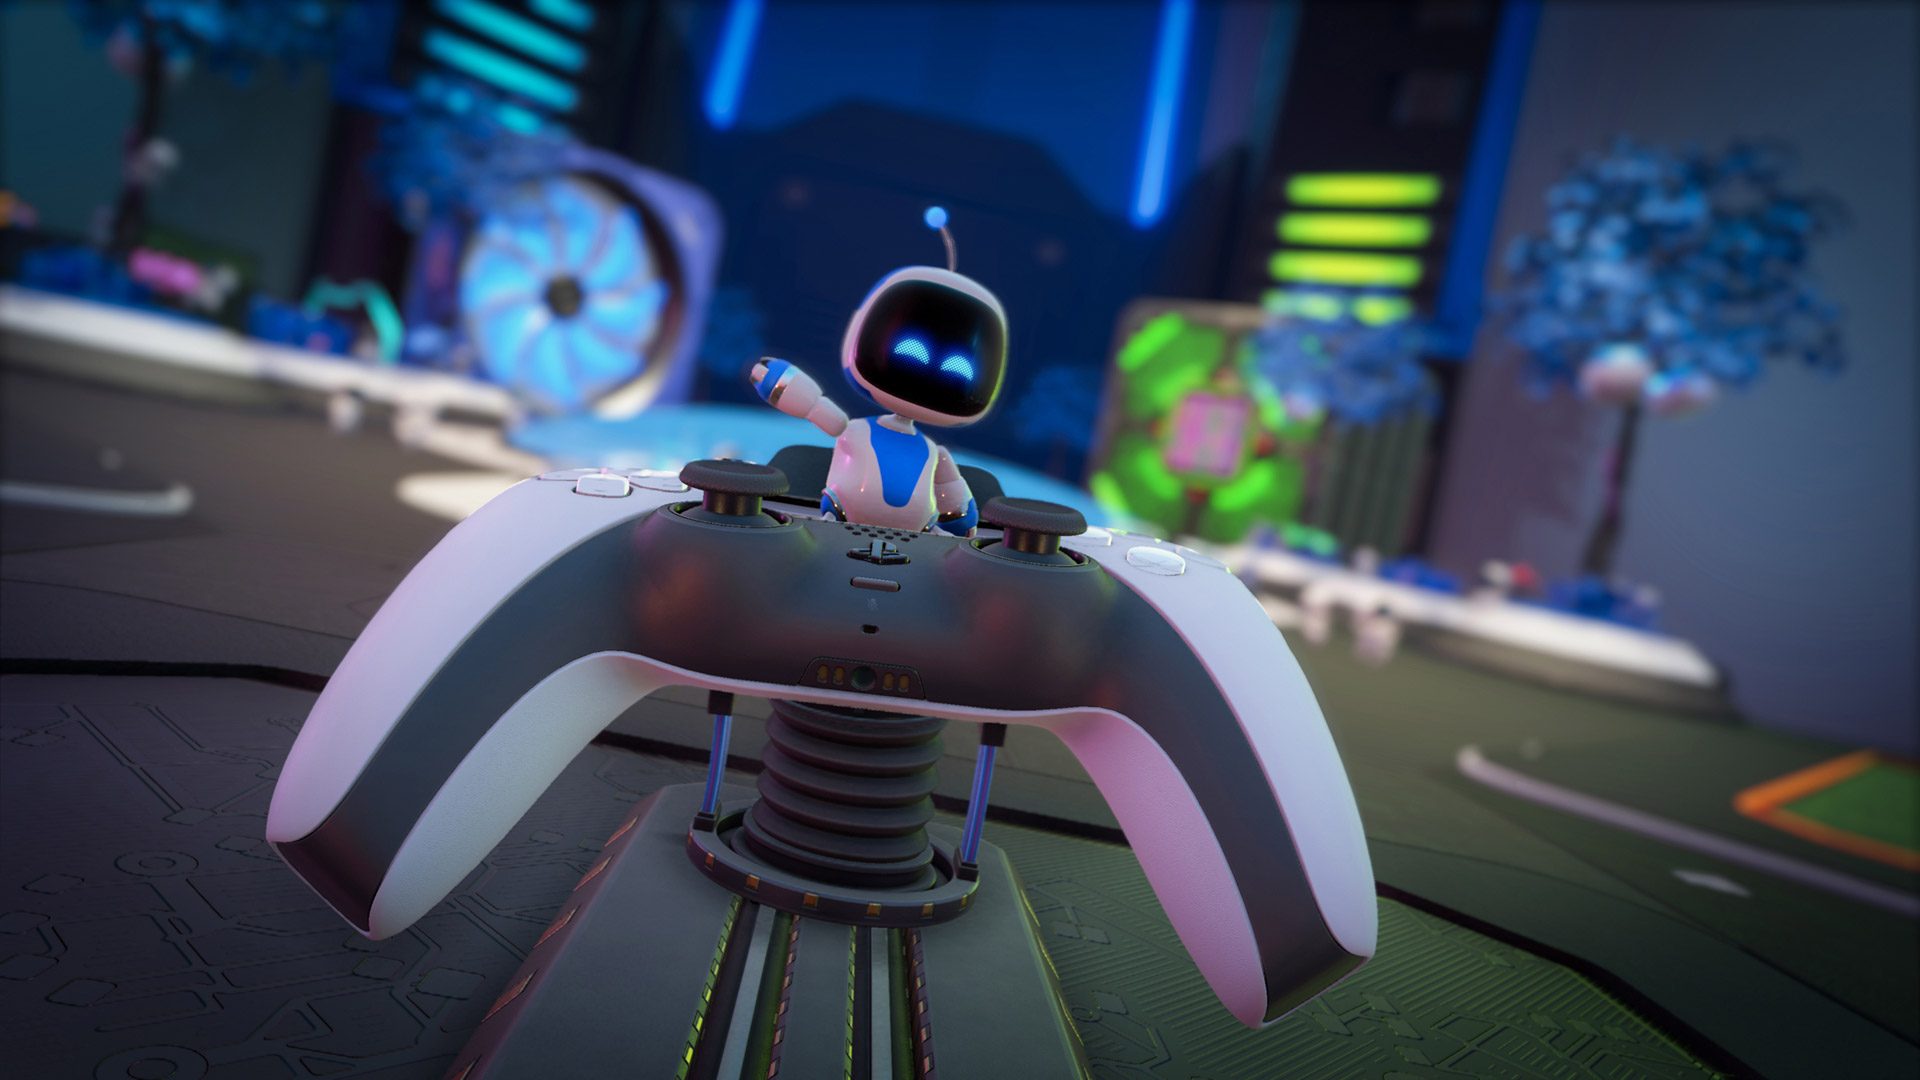 PlayStation Showcase: 5 best game reveals from PS5 and PSVR 2